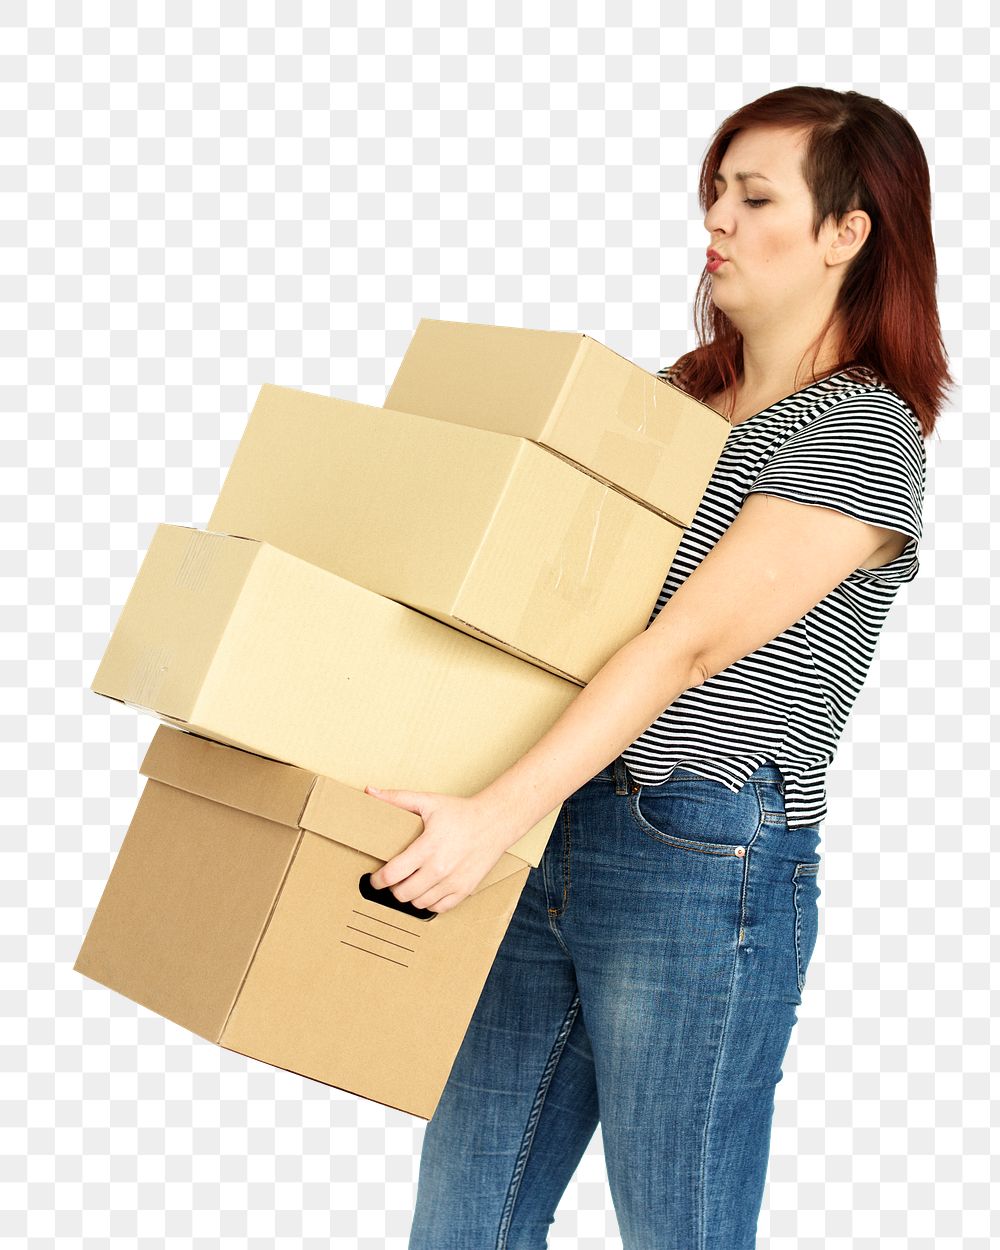 Woman holding boxes png sticker, transparent background